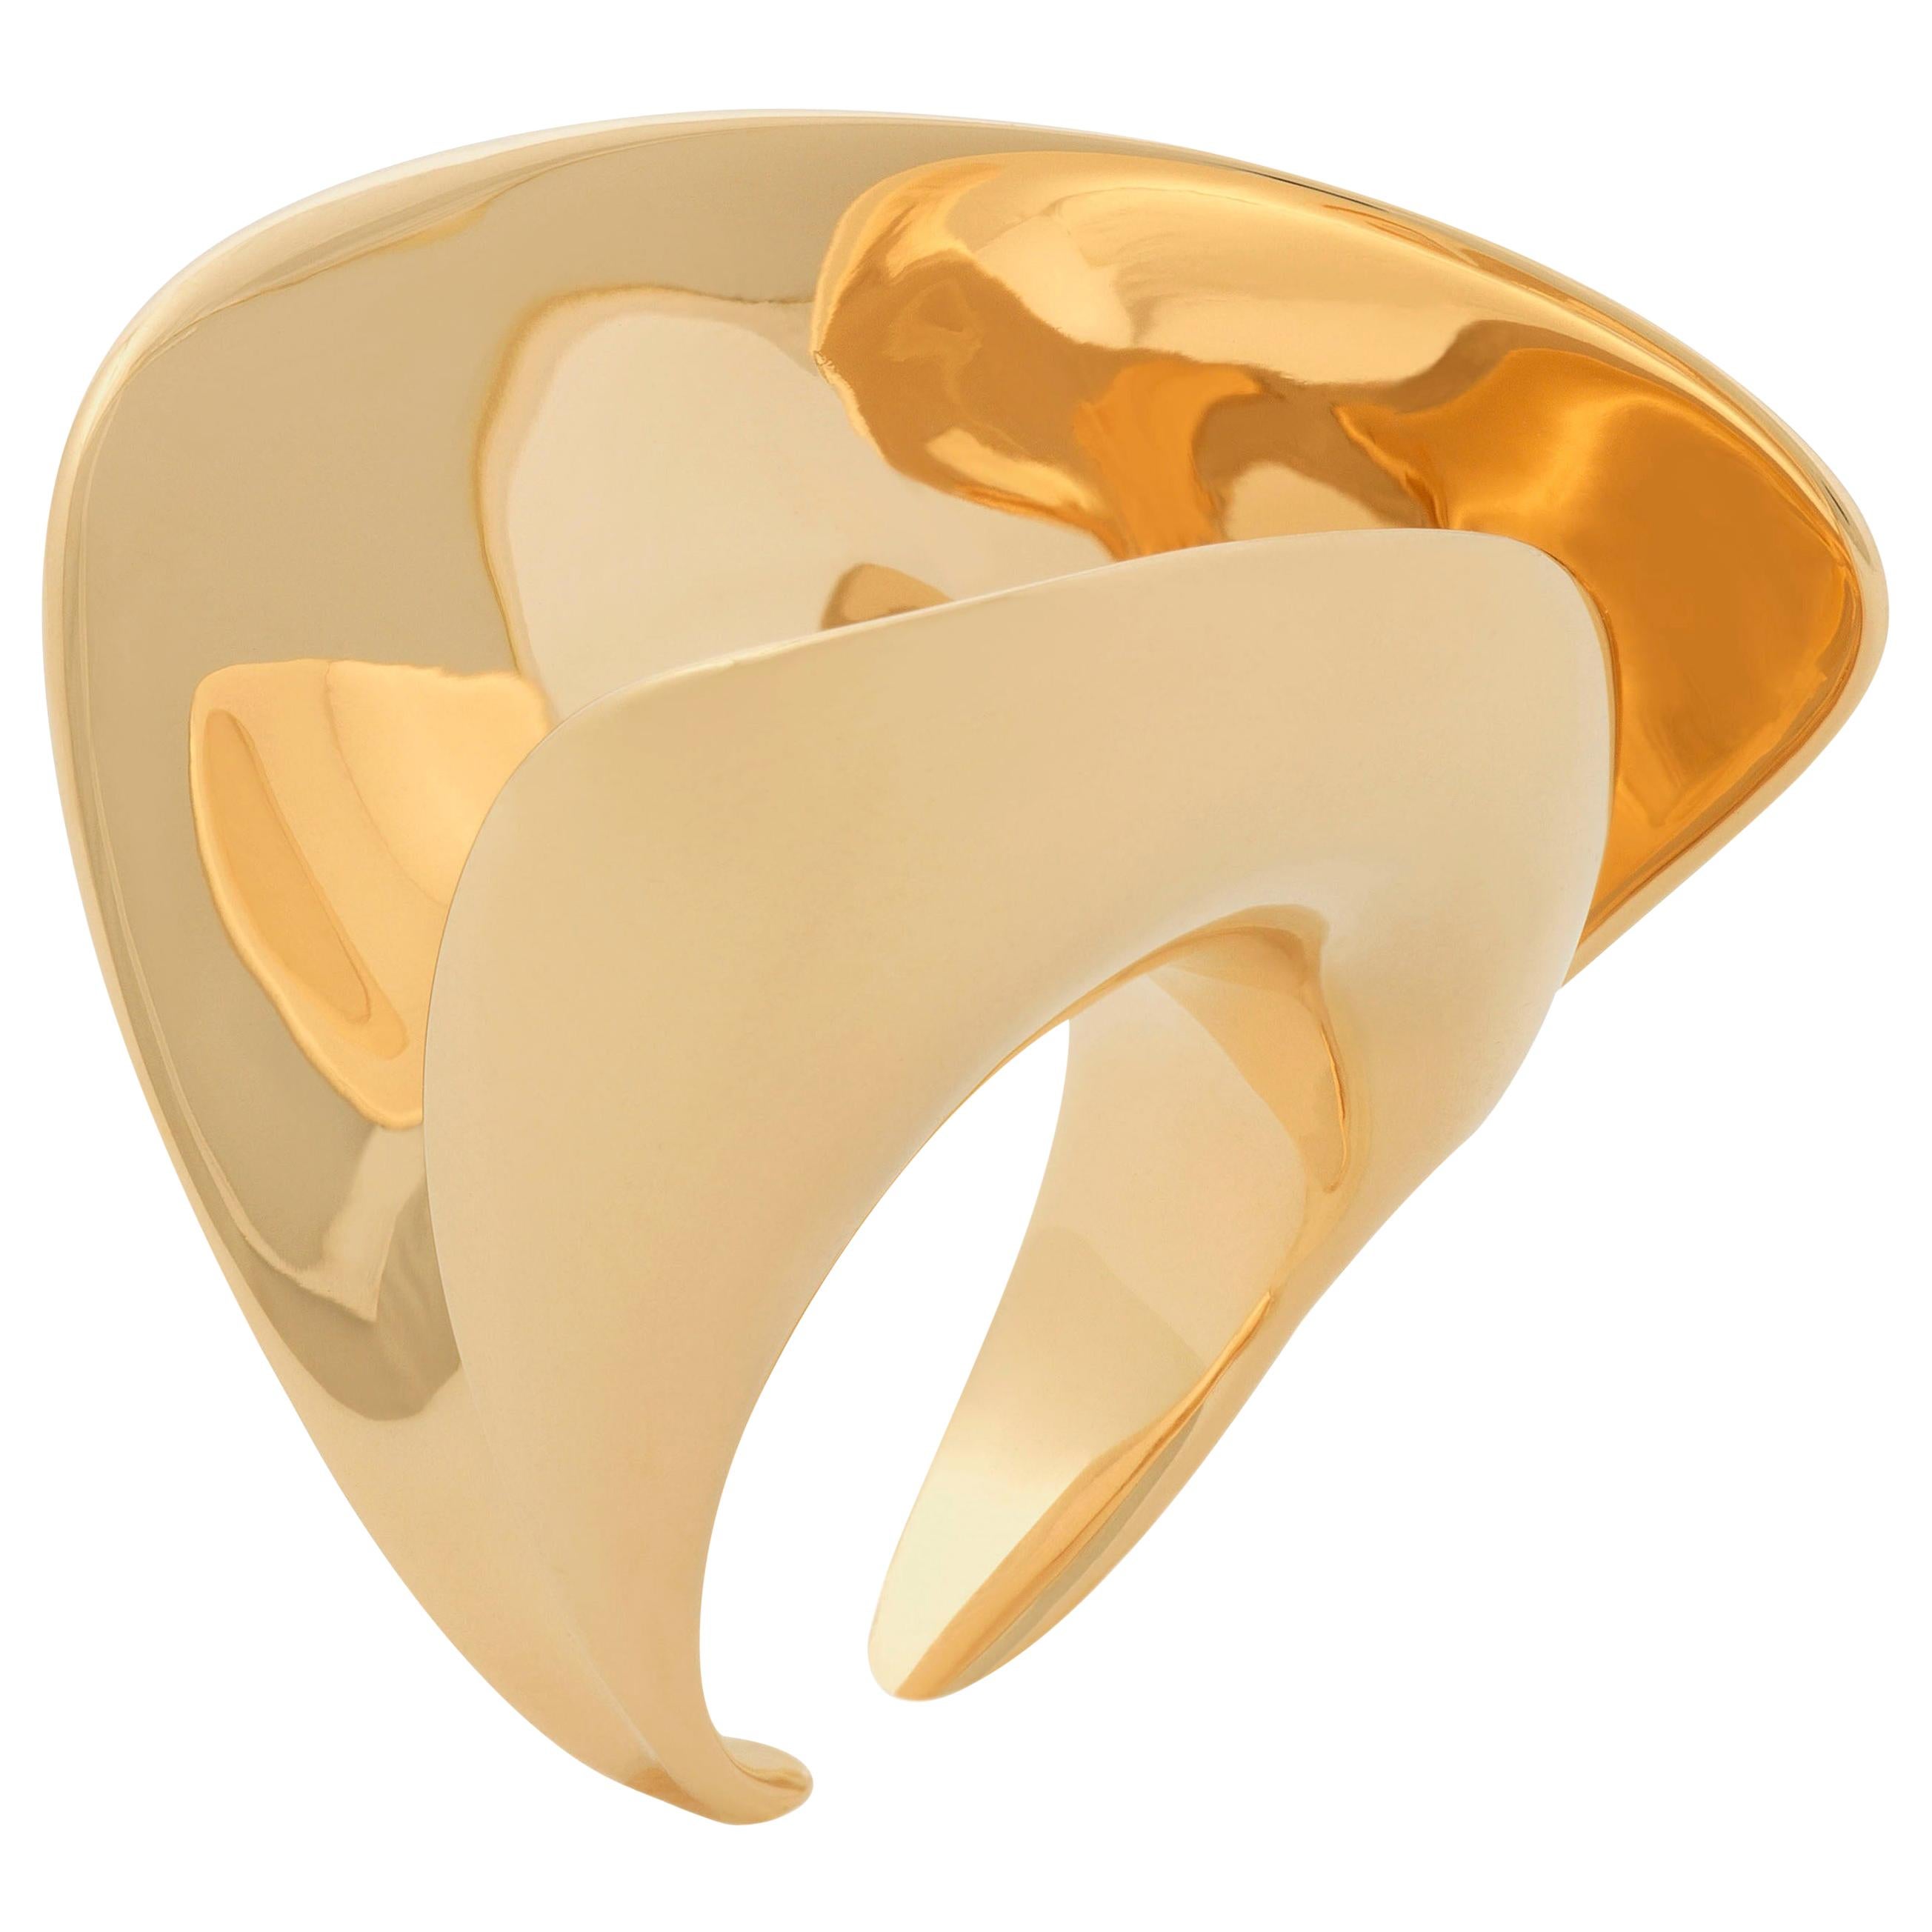 Nathalie Jean Contemporary Gold Limited Edition Skulptur Cocktail Ring